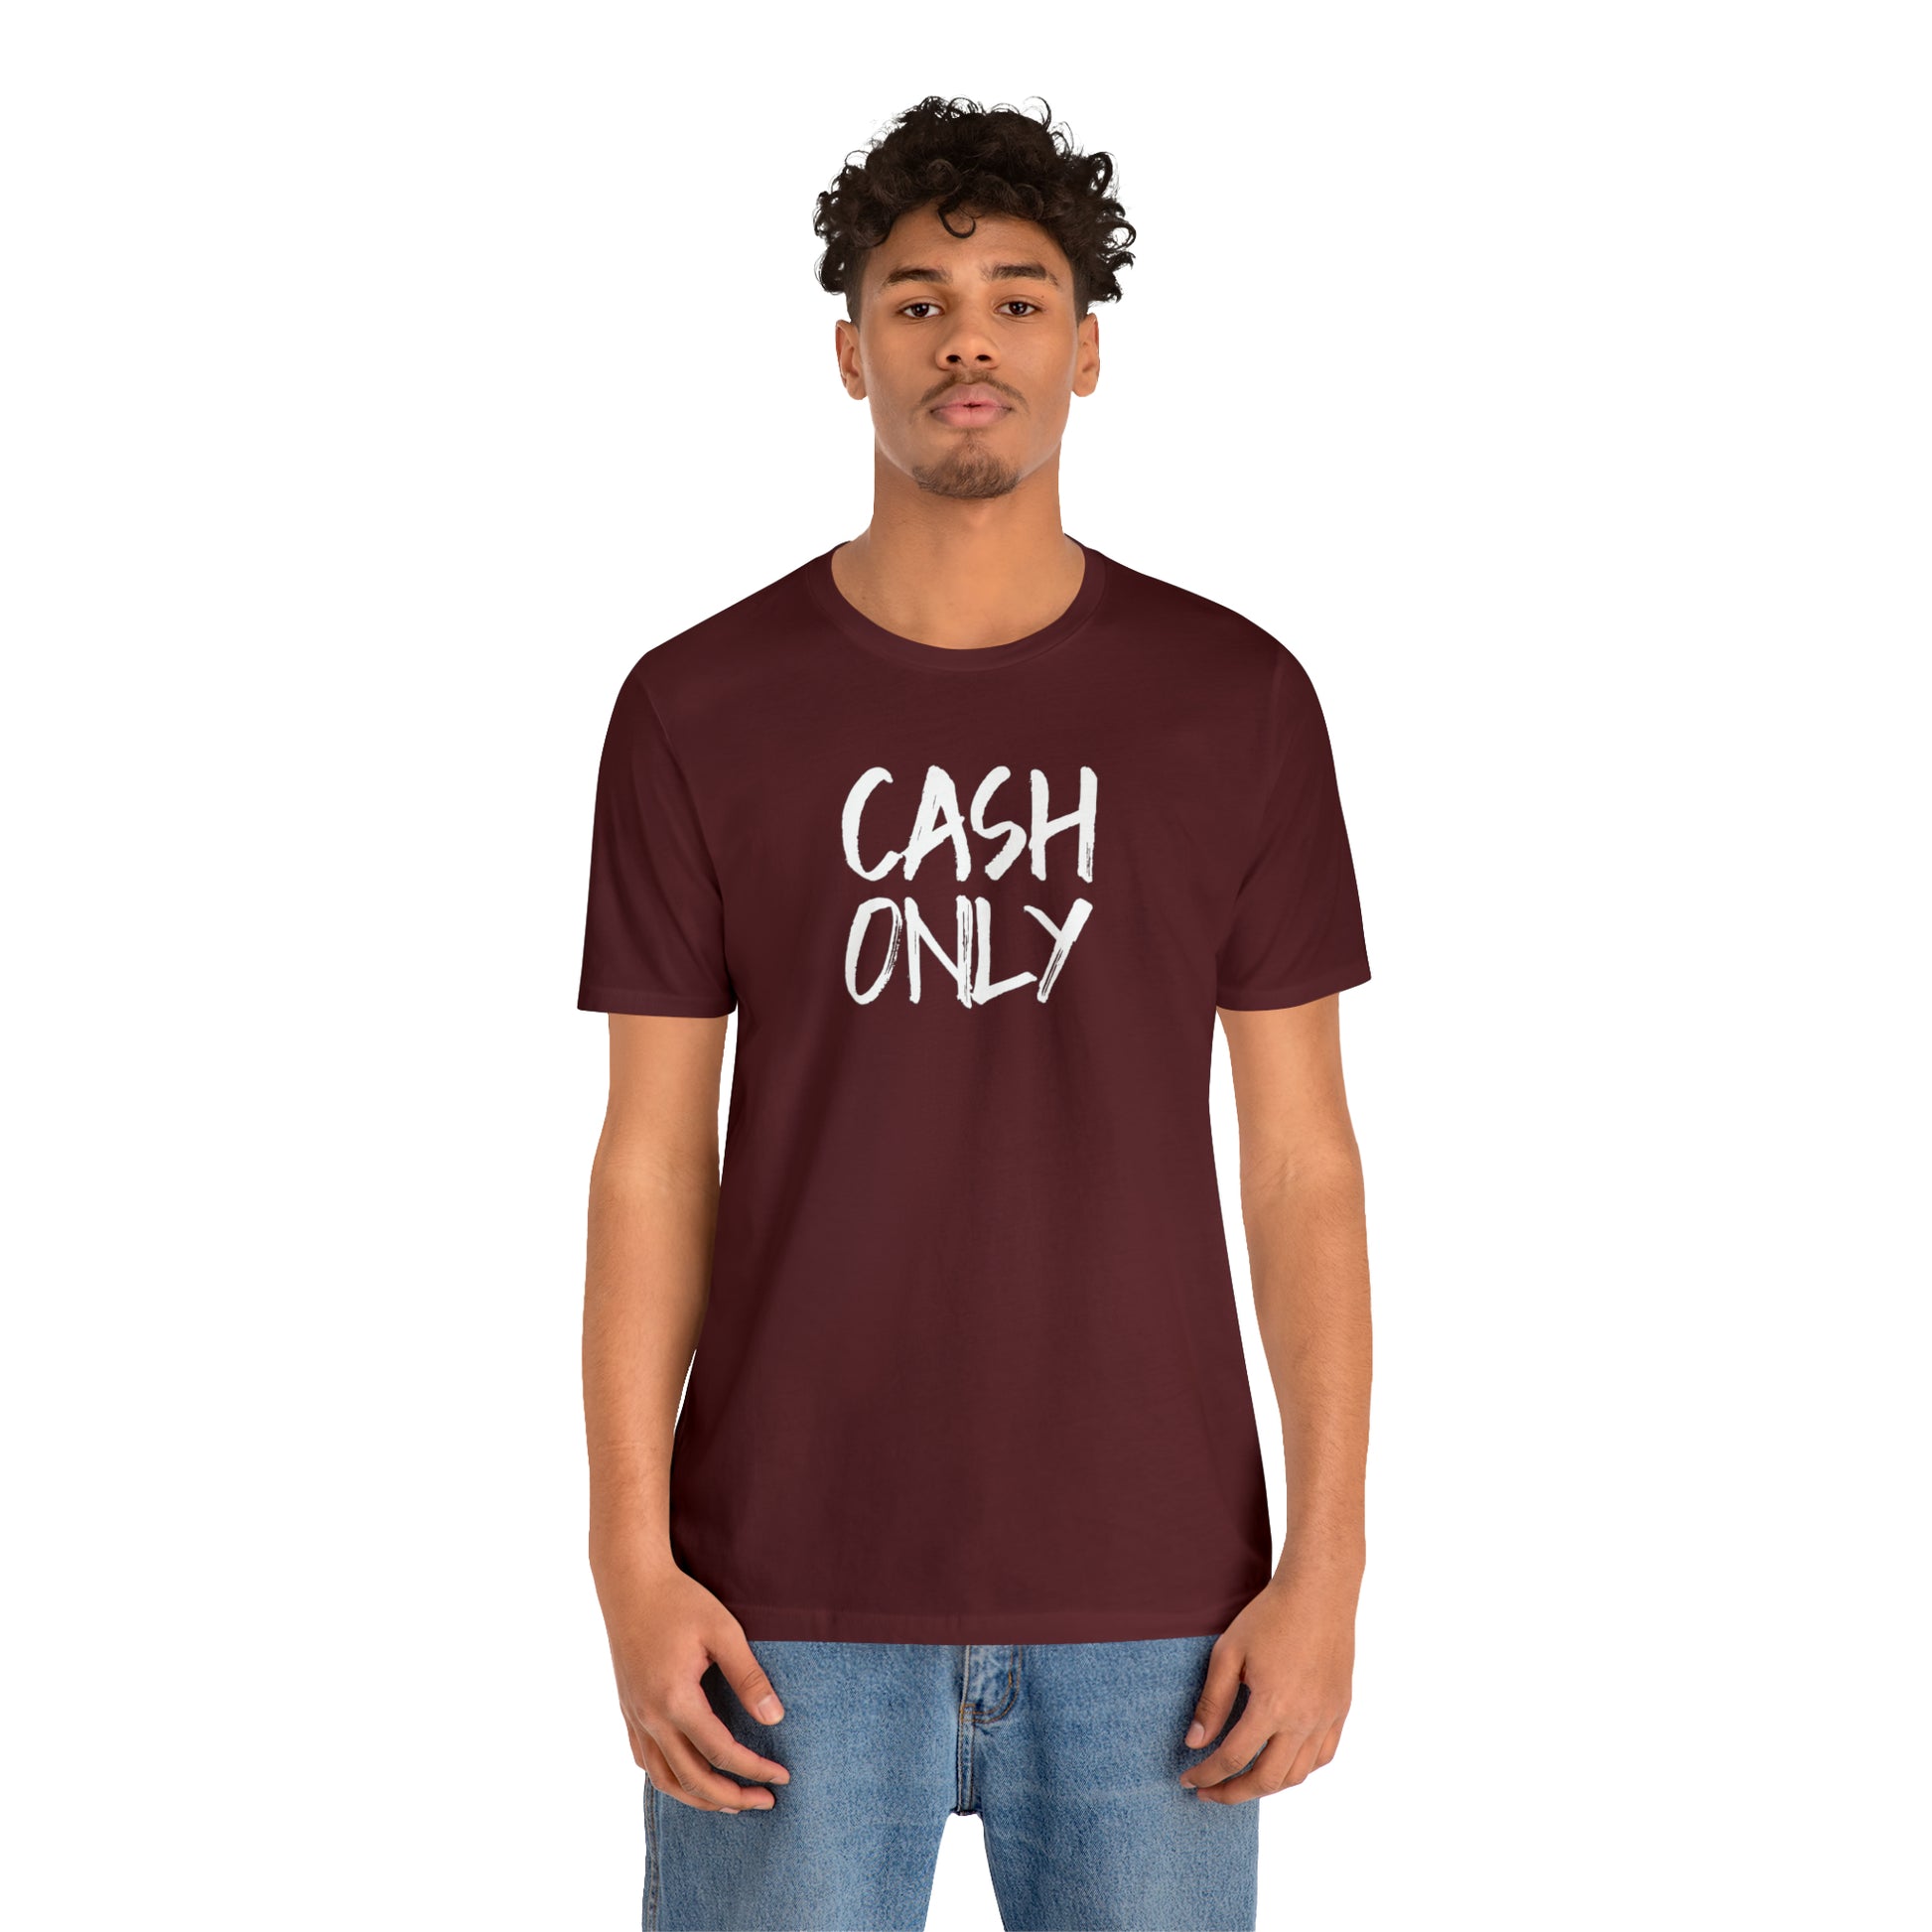 CASH ONLY - Wicked Naughty Apparel